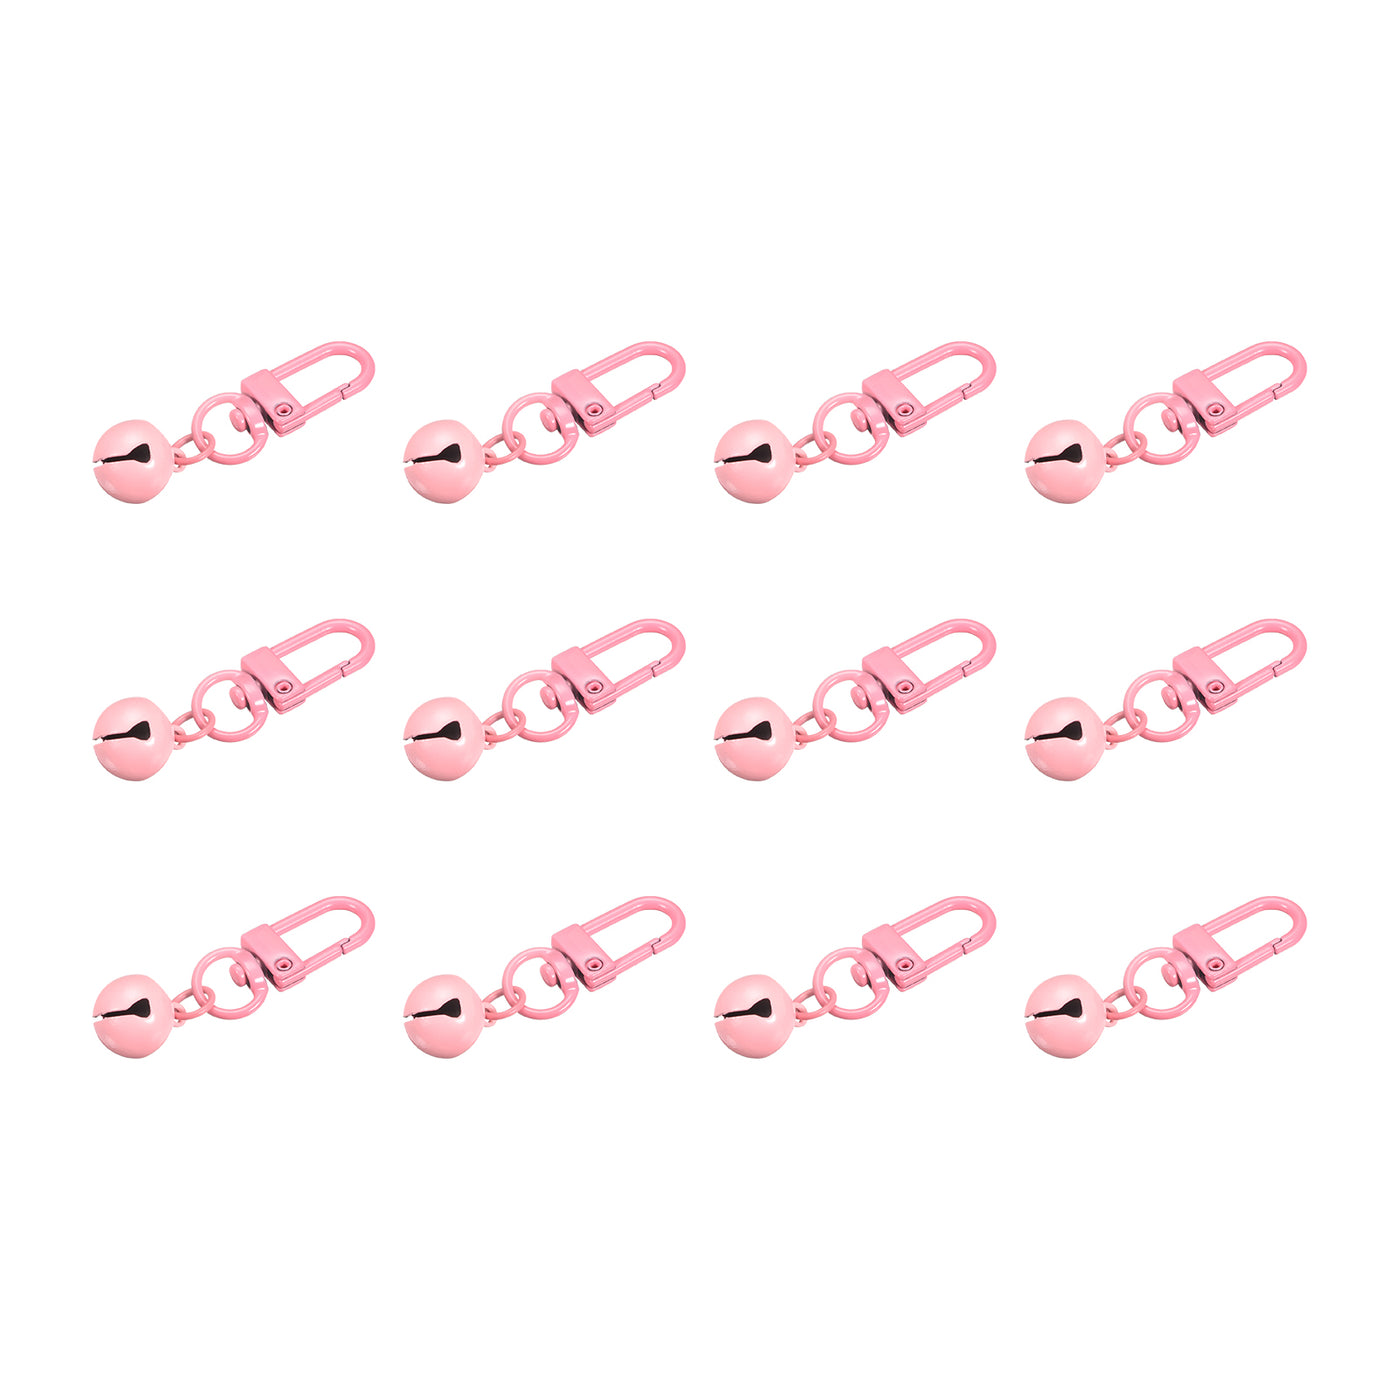 uxcell Uxcell 12Pcs Pet Bells, 13mm/0.51" Dia Pink Bells with Clasps for DIY Crafts